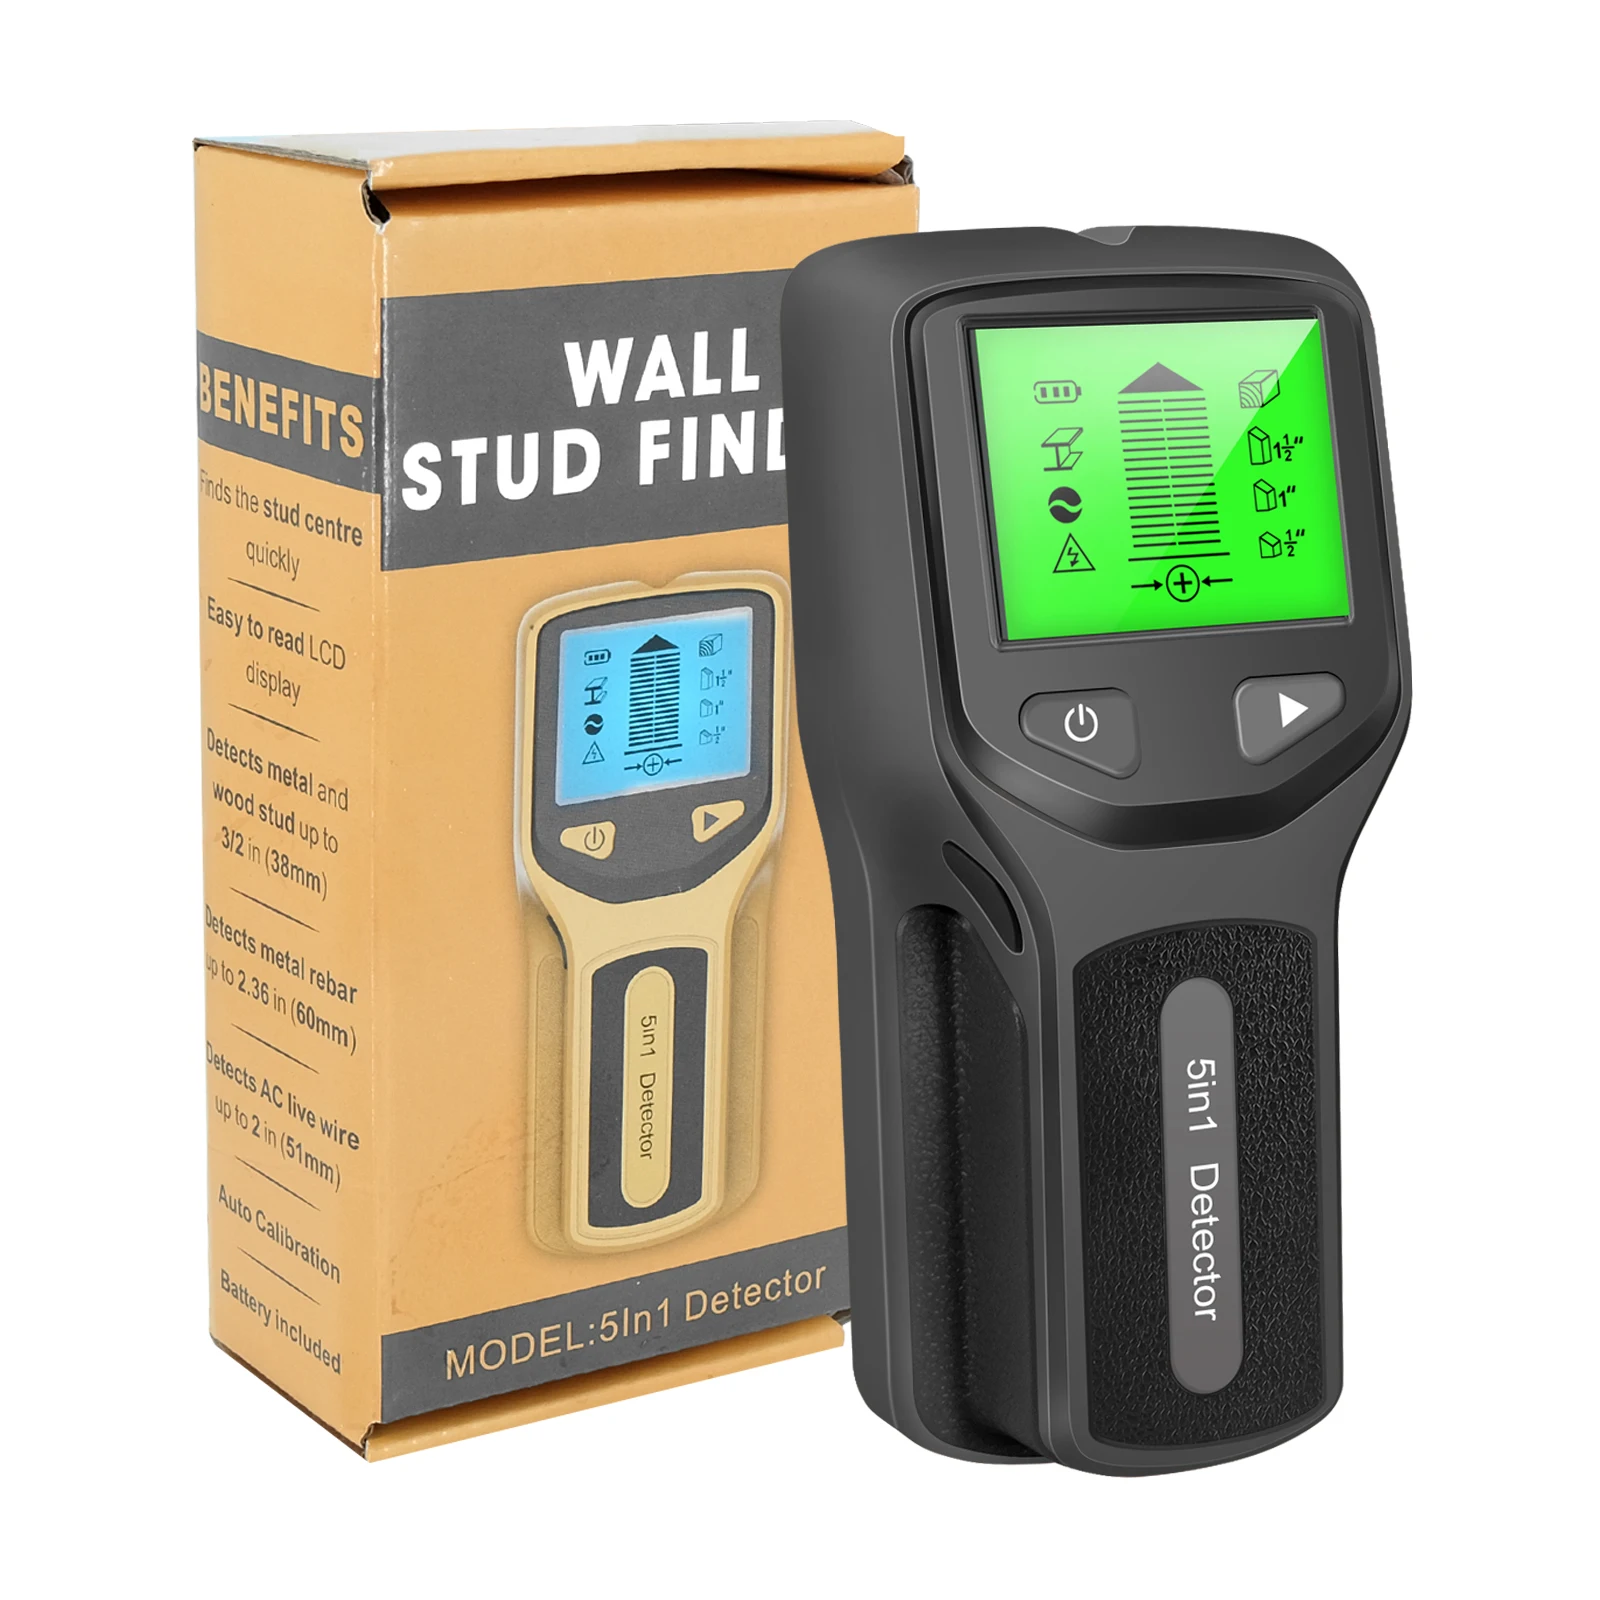 5 In 1 Metal Detector Wall Thickness Gauge Backlight Wall Detector Wall Stud Finder Electronic Wall Scanner Gold Finder 50% Off